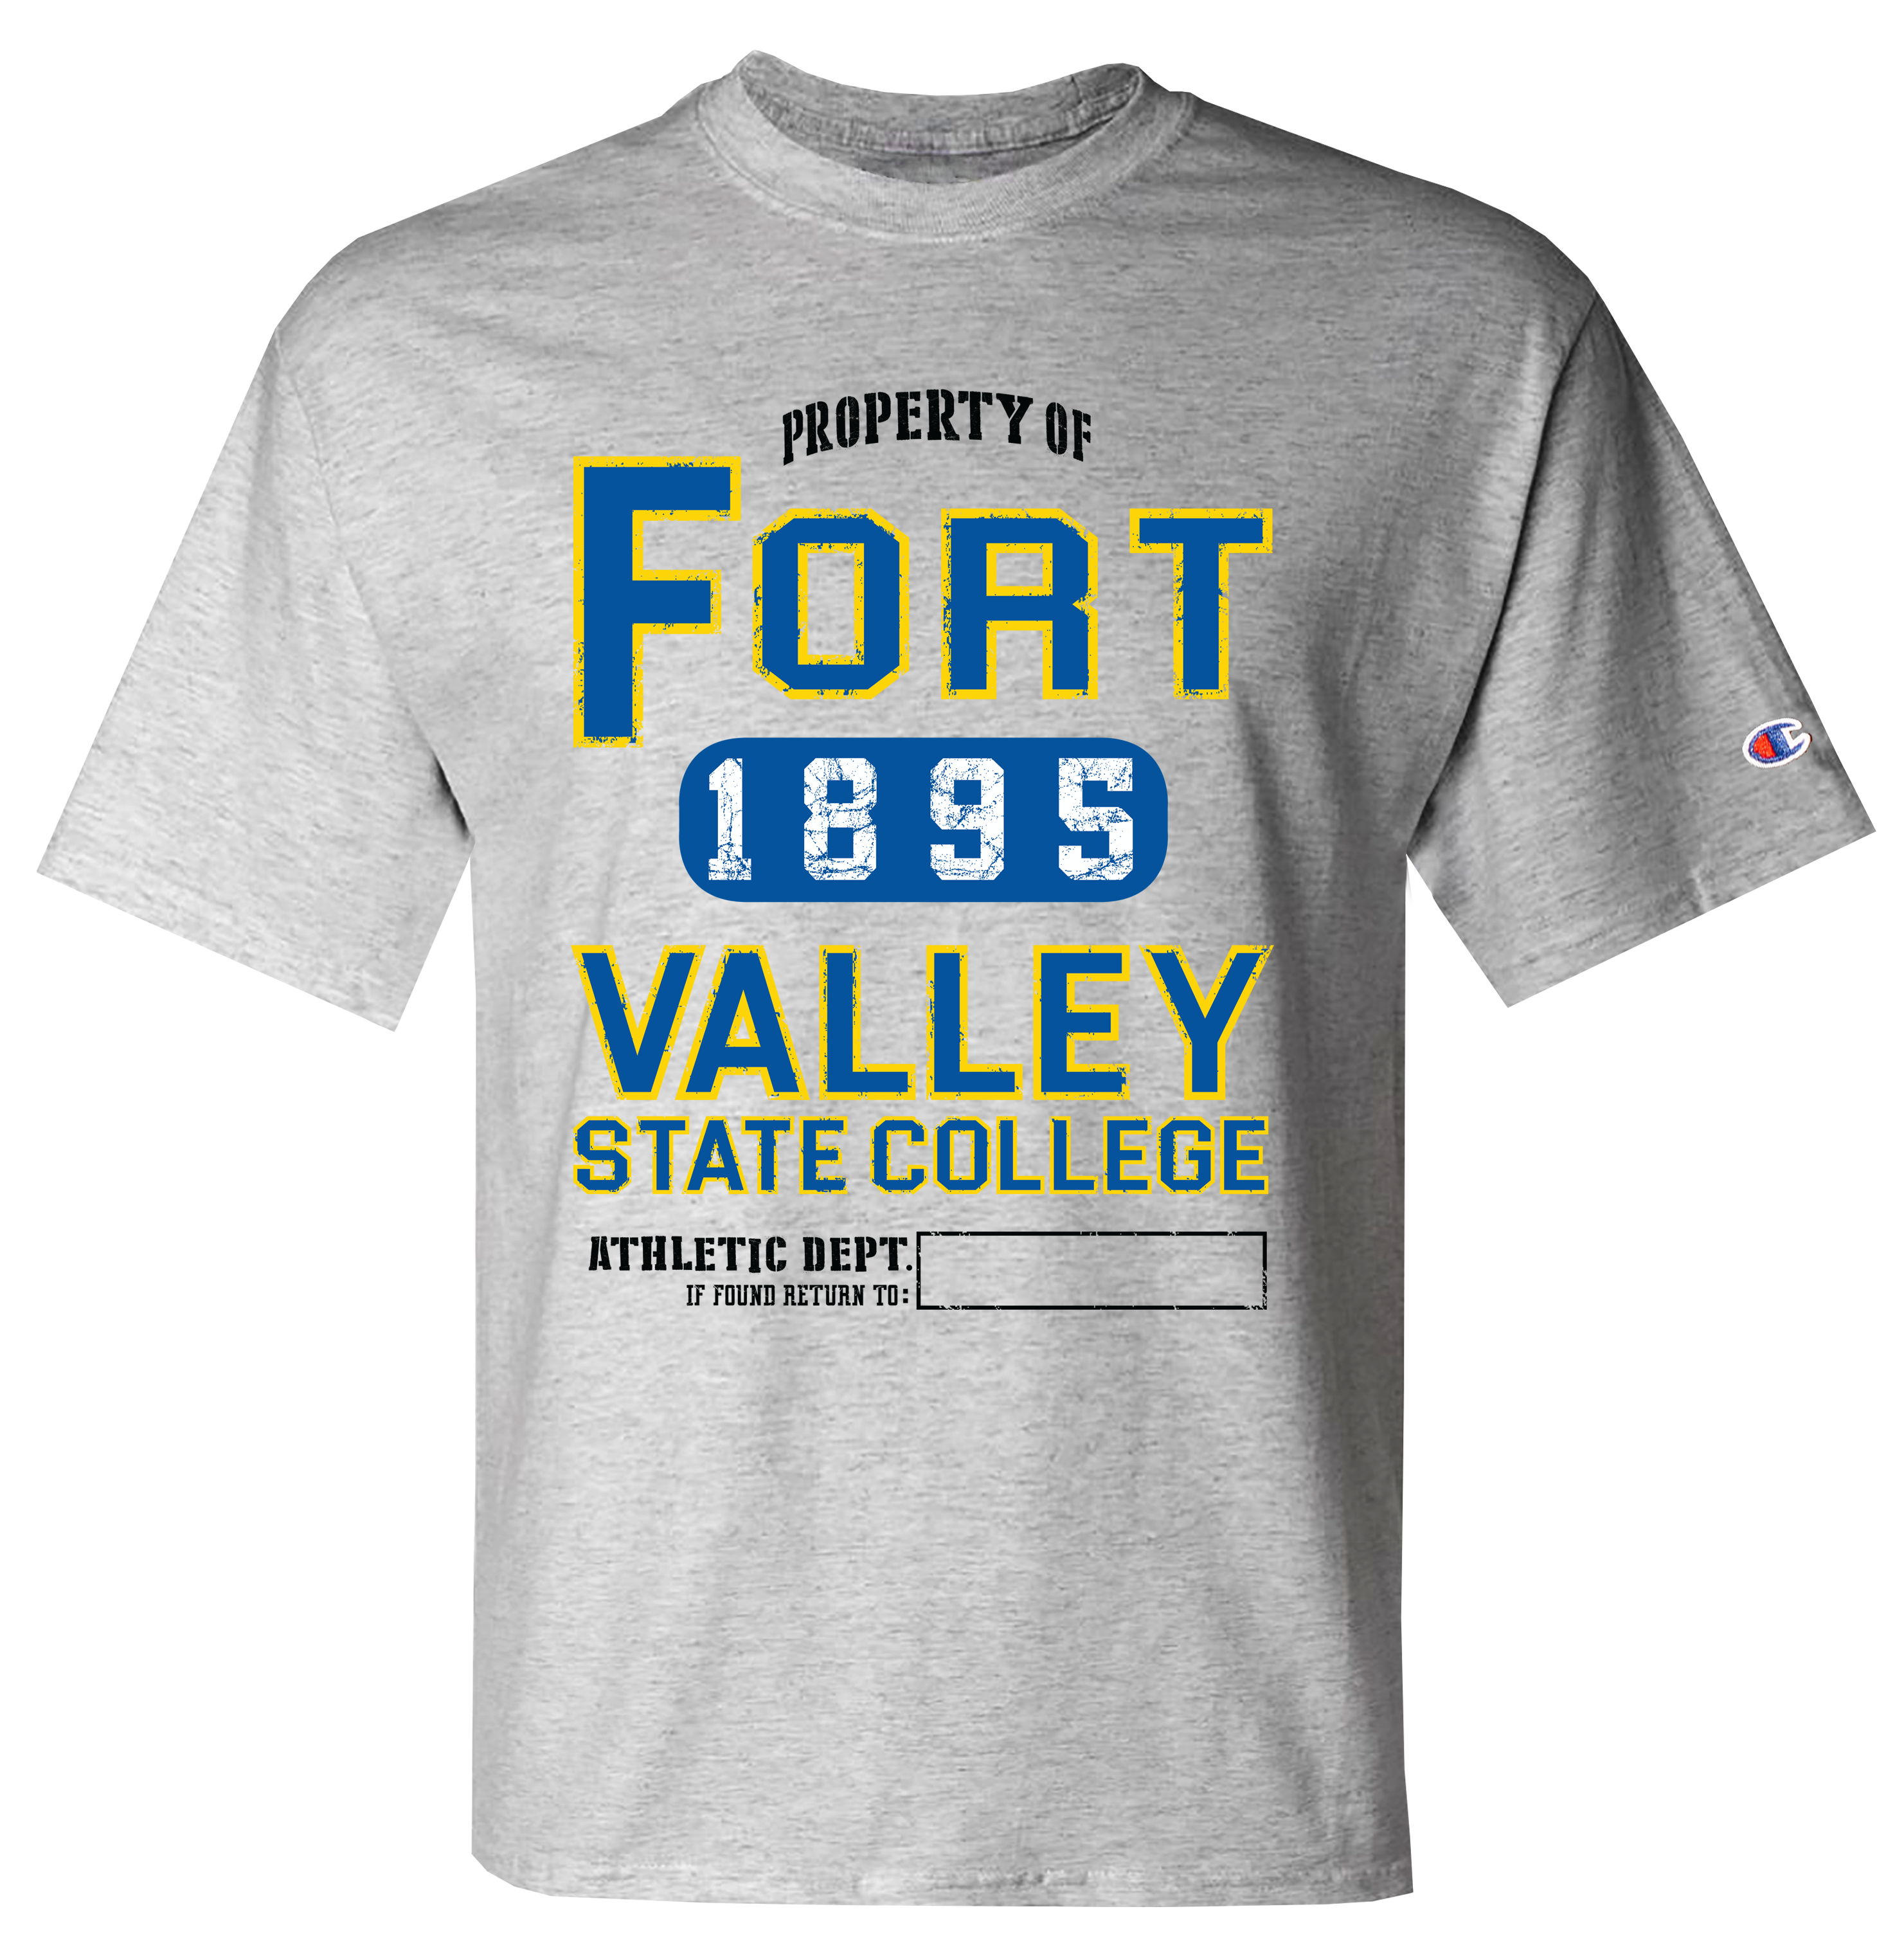 BCU X Champion Athletic Dept. Tee - Fort Valley